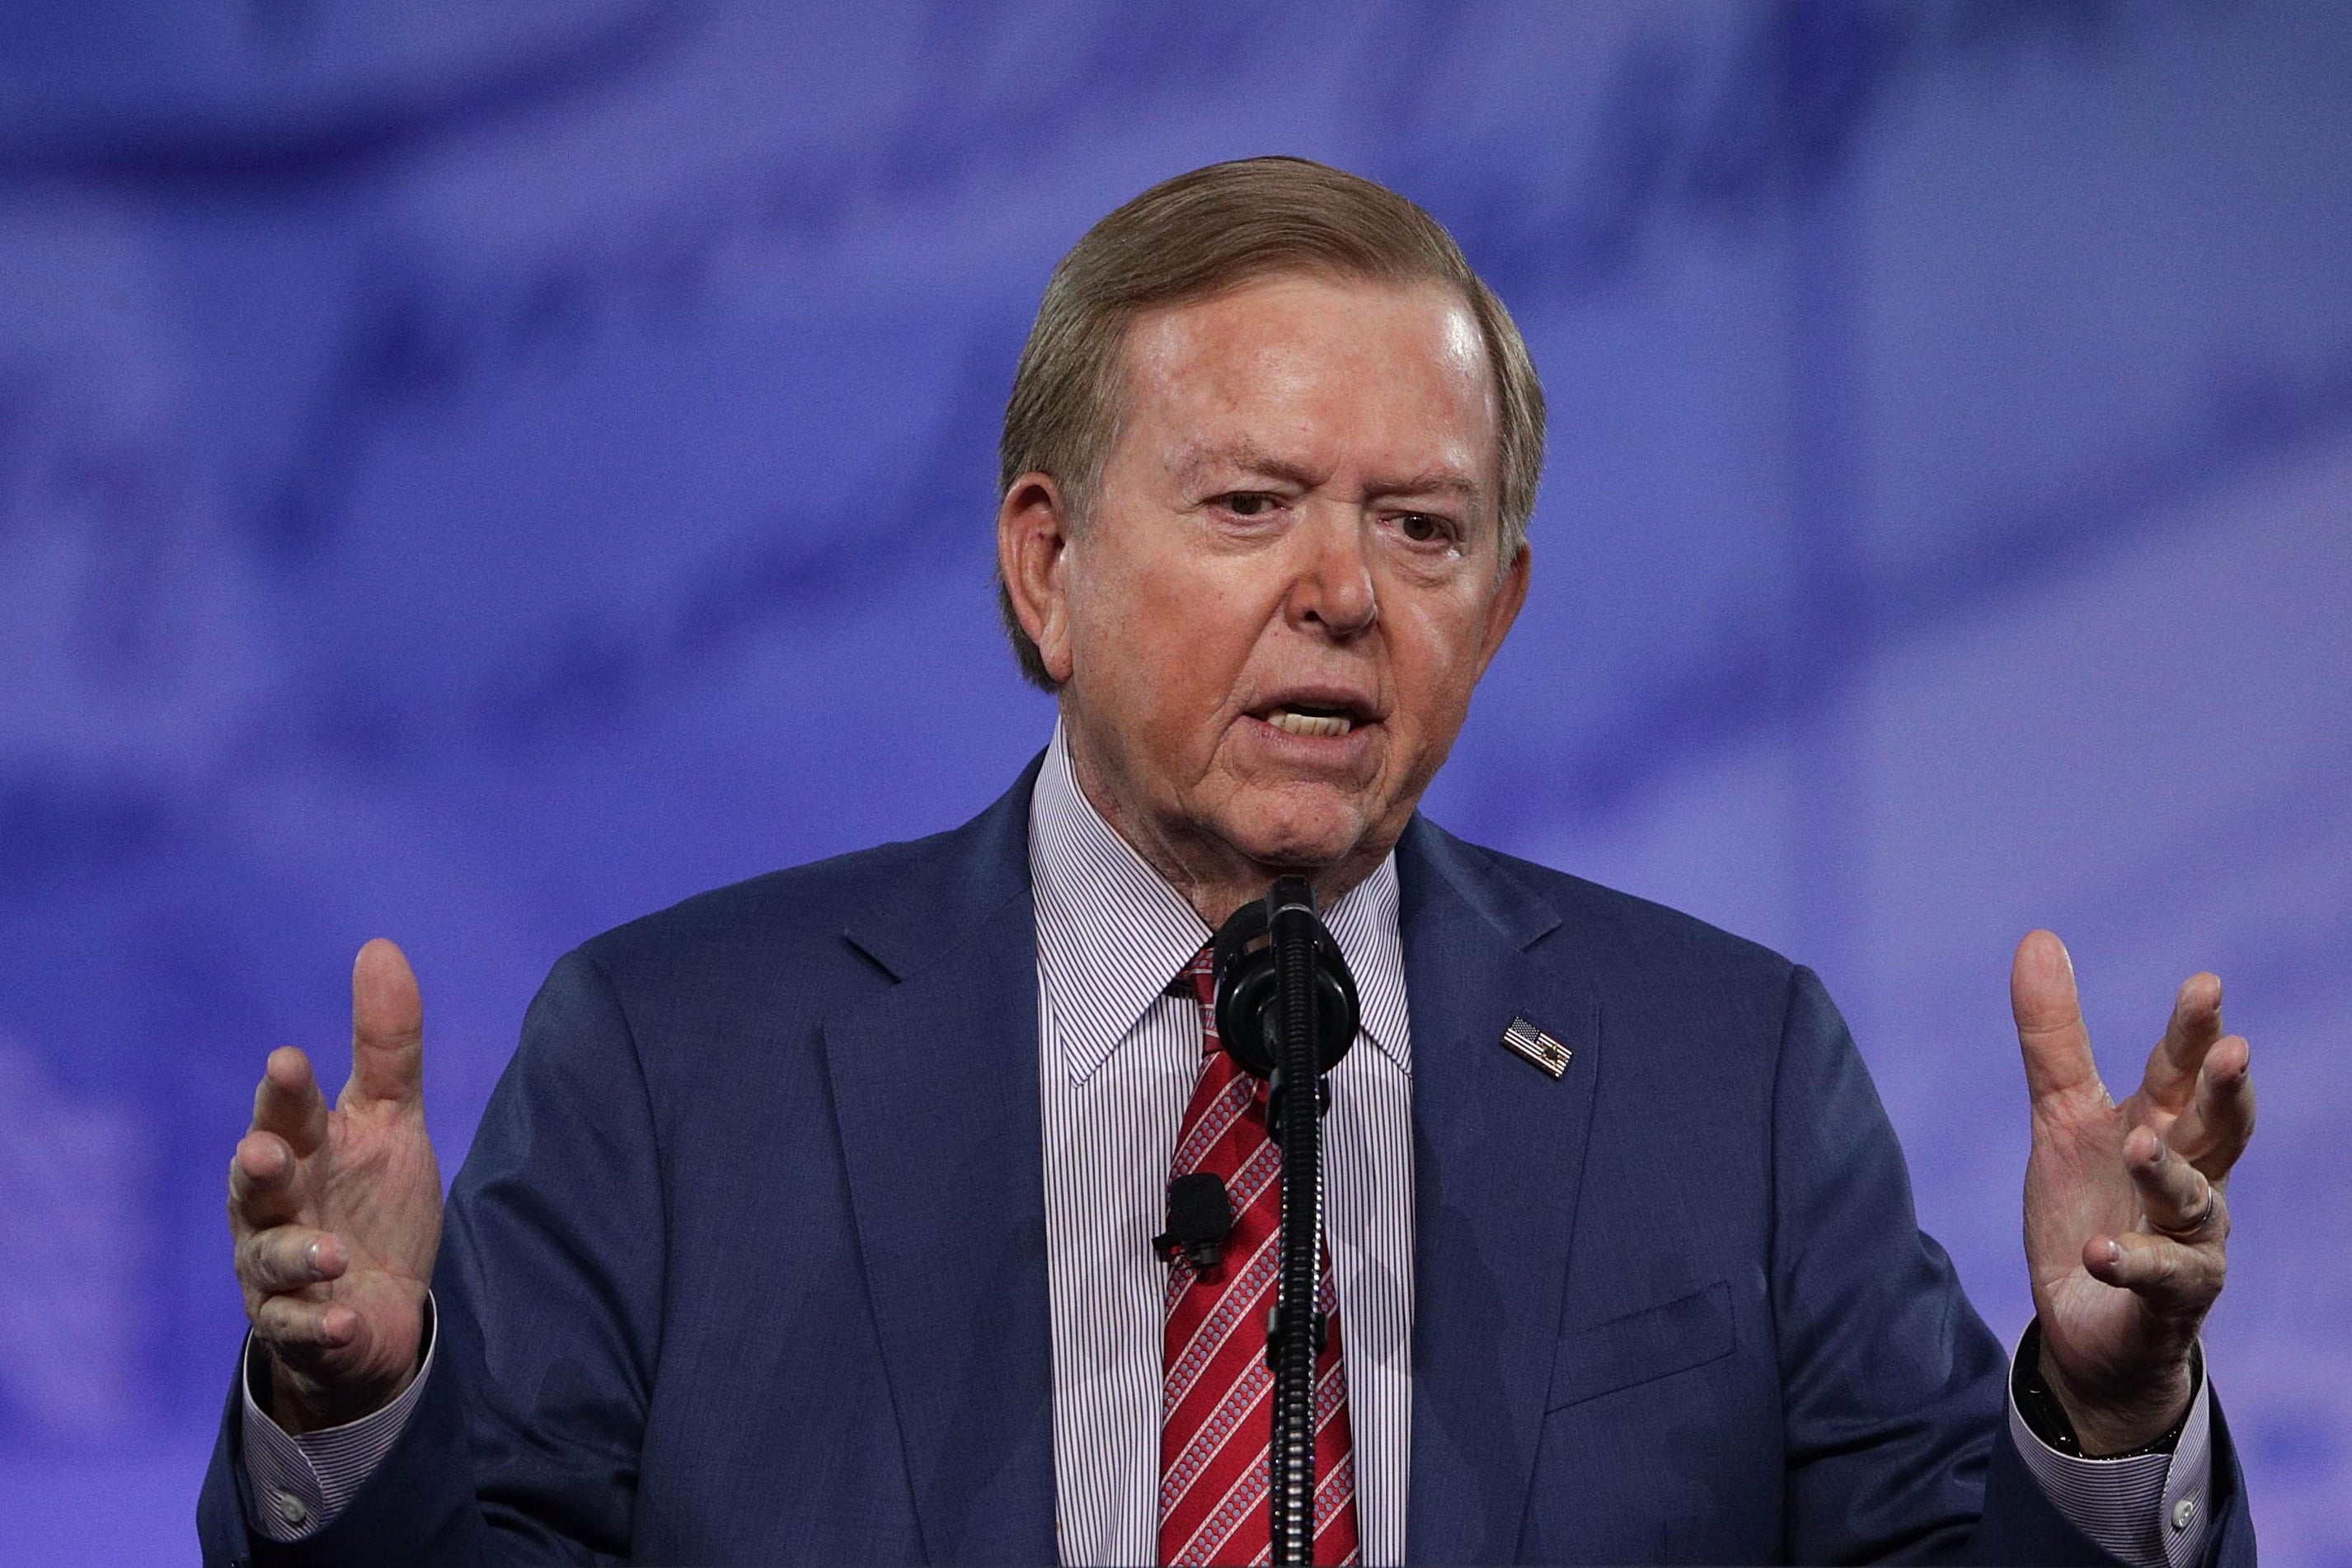 Lou Dobbs of Fox Business Network speaks during the Conservative Political Action Conference at the Gaylord National Resort and Convention Center February 24, 2017 in National Harbor, Maryland.